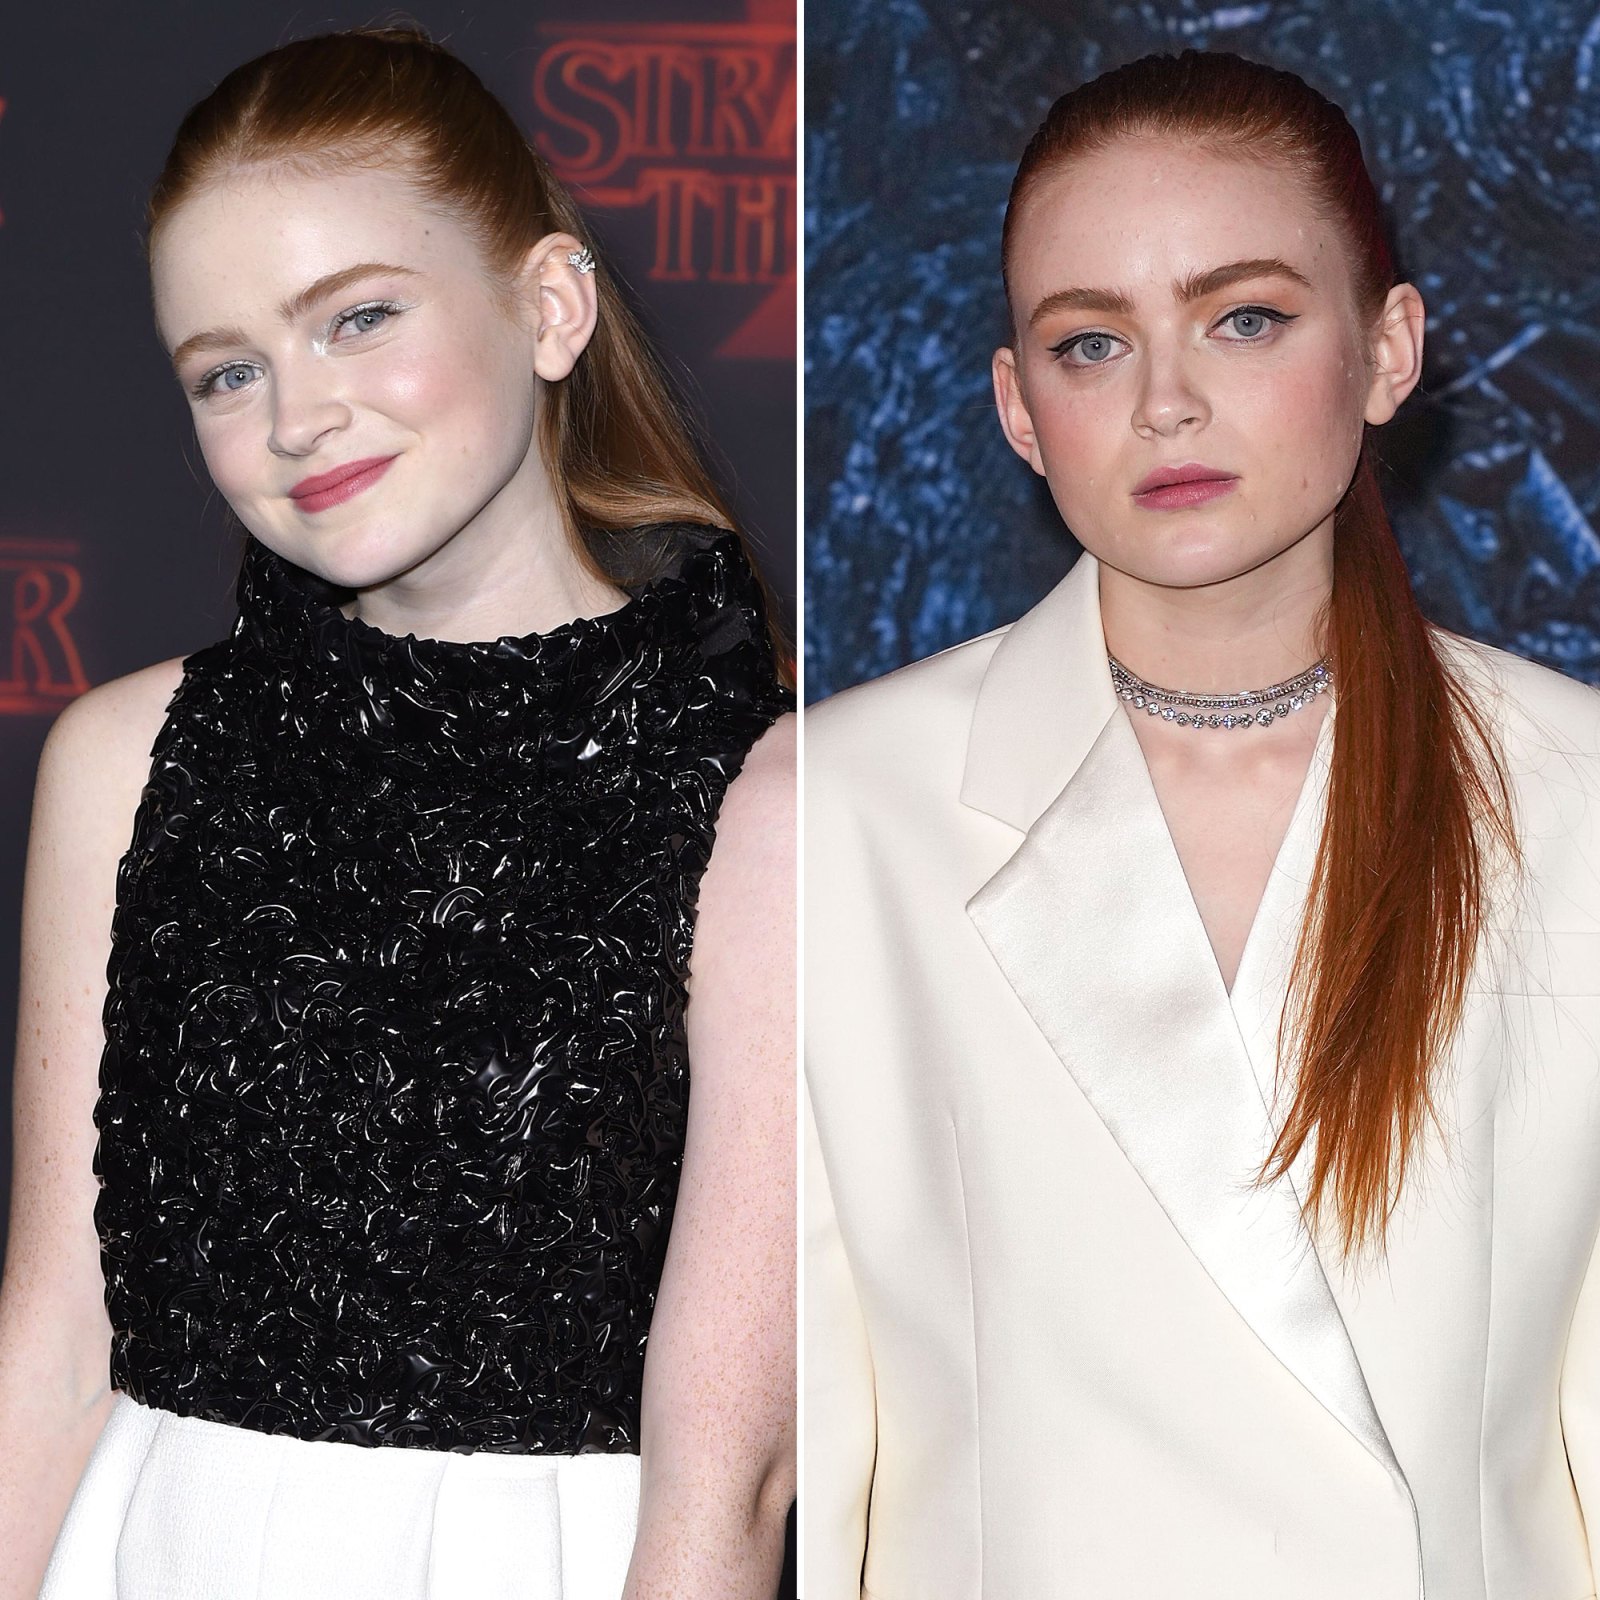 Sadie Sink Stranger Things Cast From Season 1 to Now